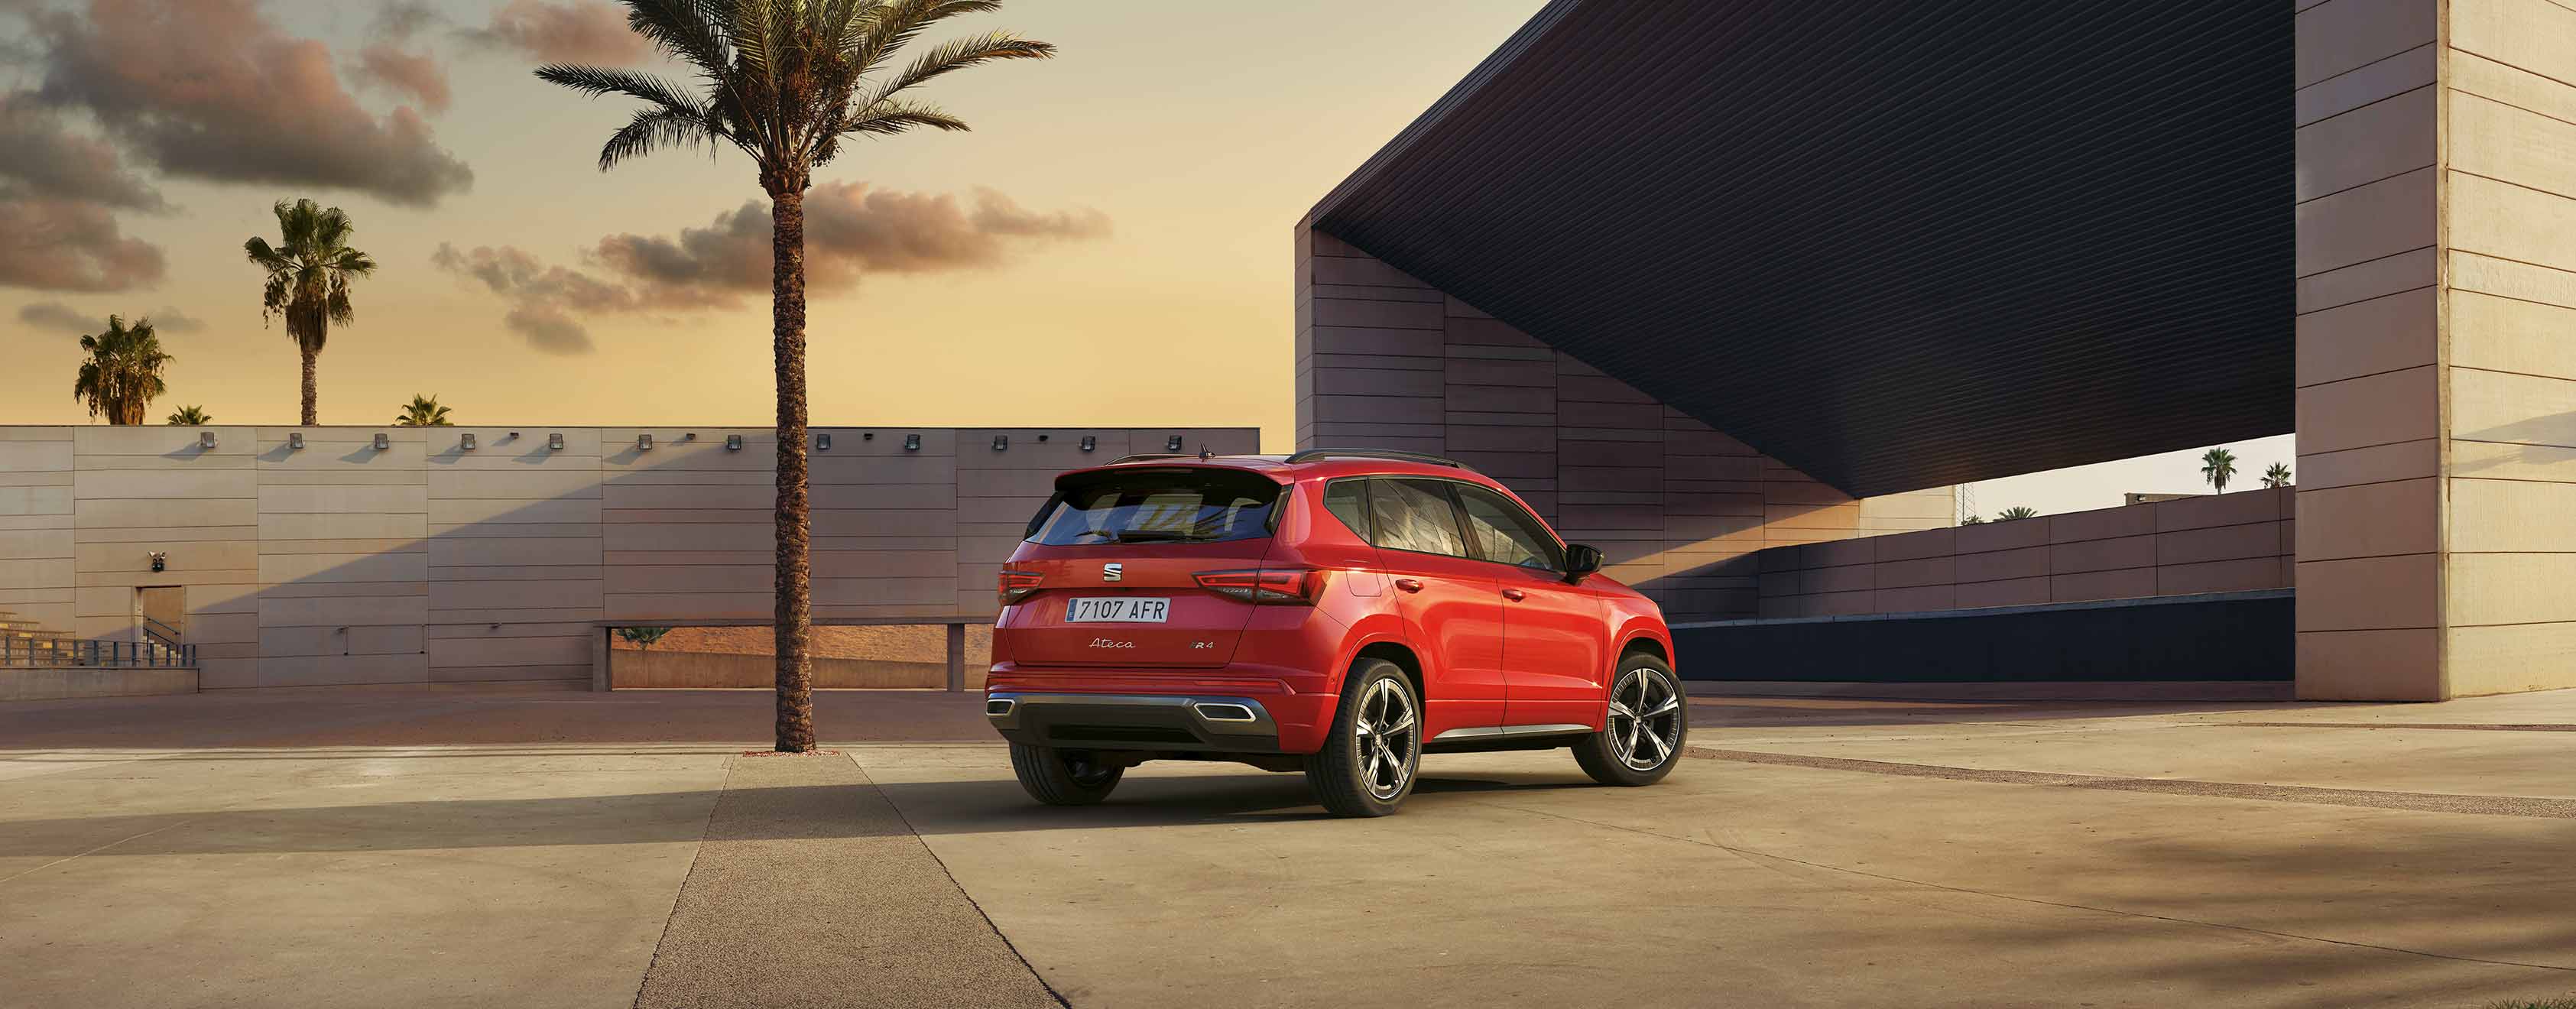 seat-ateca-red-desire-parked